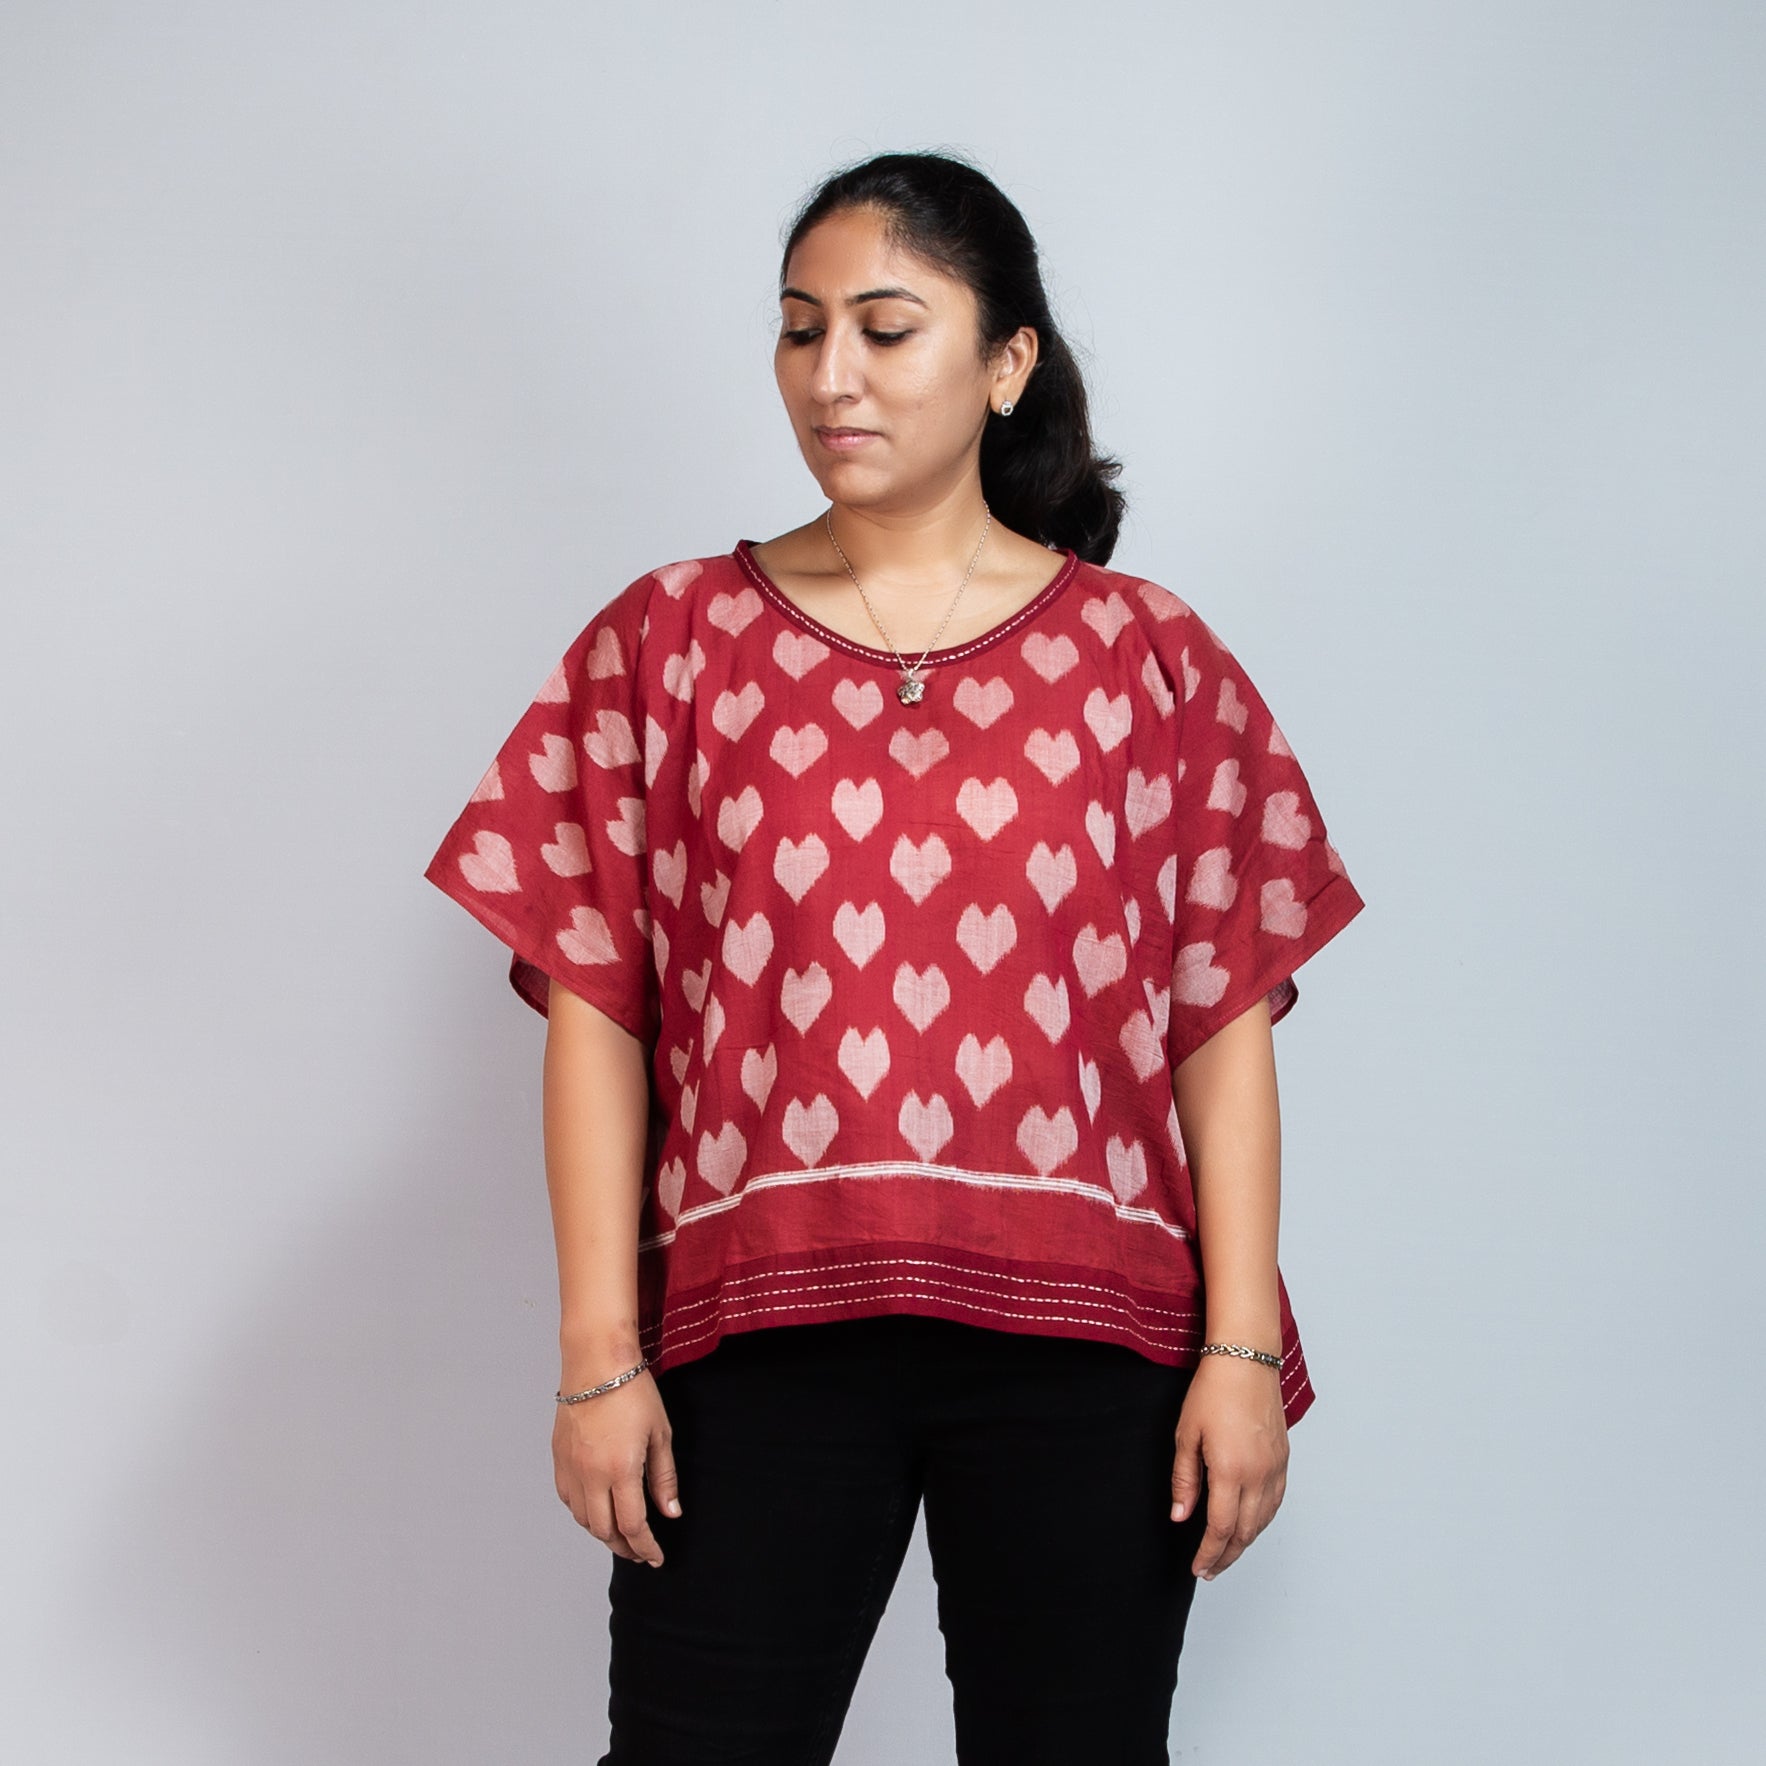 Taash-Queen of Hearts-Free size Top